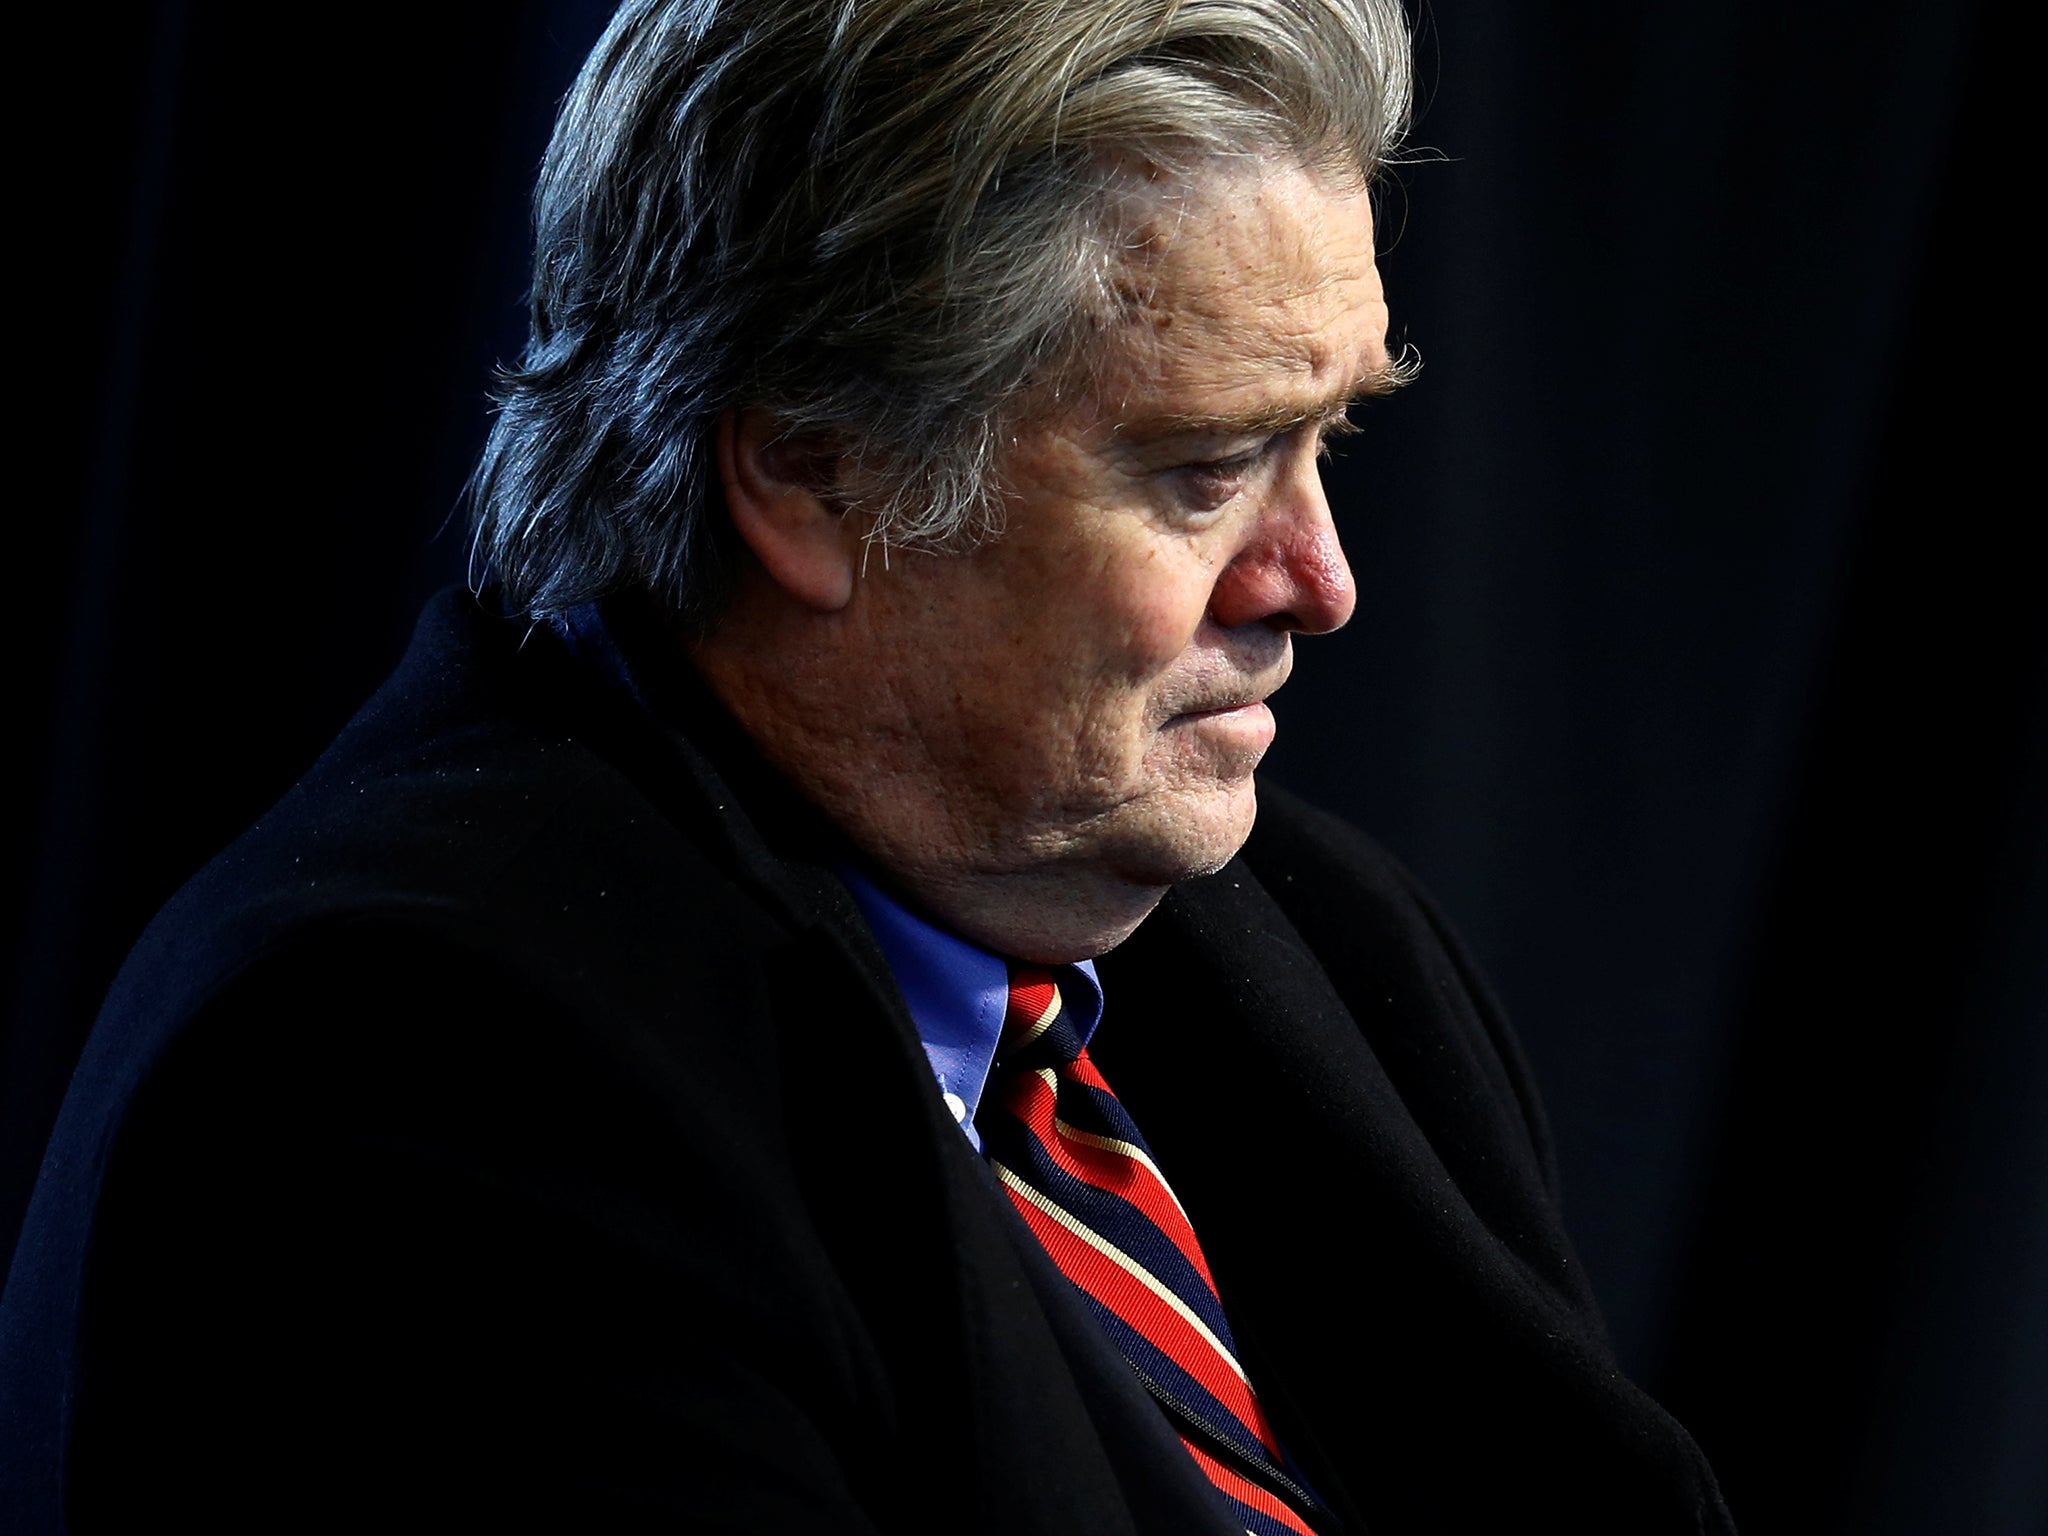 Steve Bannon intends to 'crush the opposition' as he returns to Breitbart